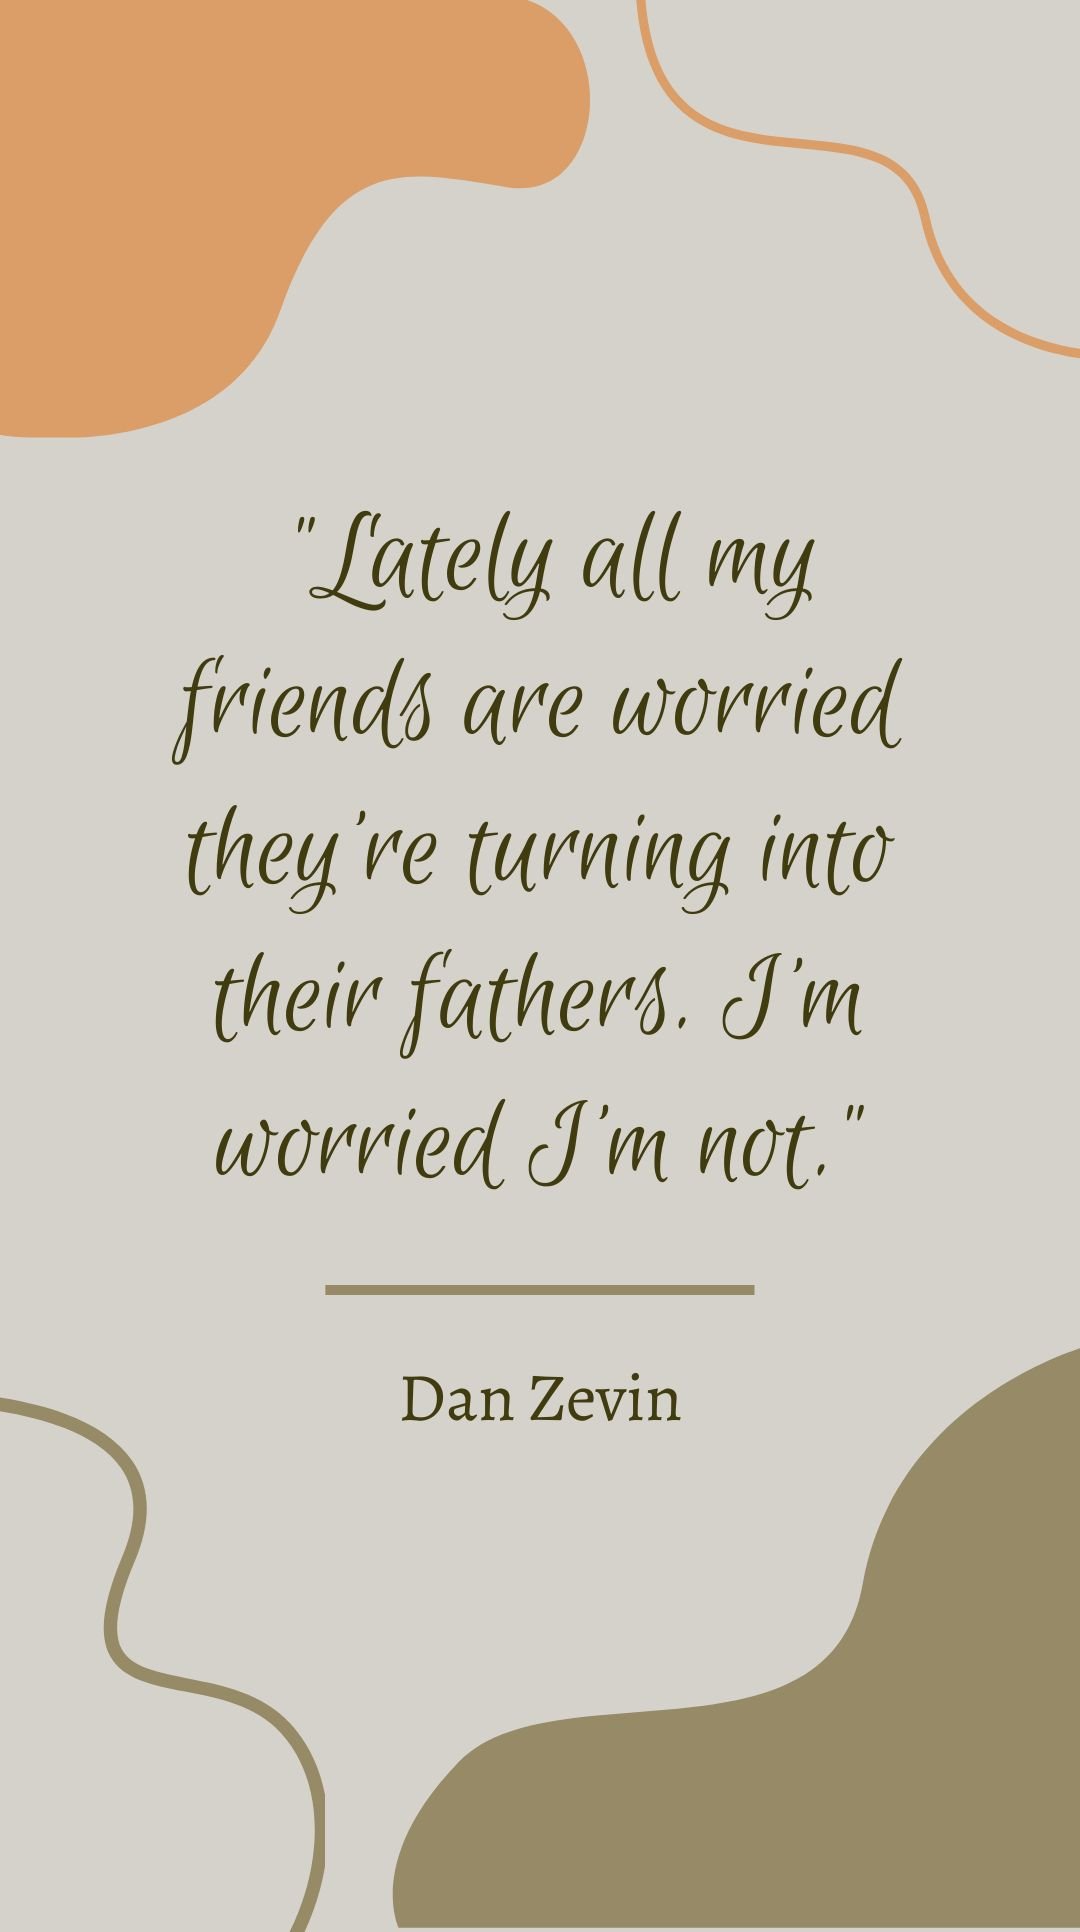 Free  Dan Zevin - Lately all my friends are worried they’re turning into their fathers. I’m worried I’m not.